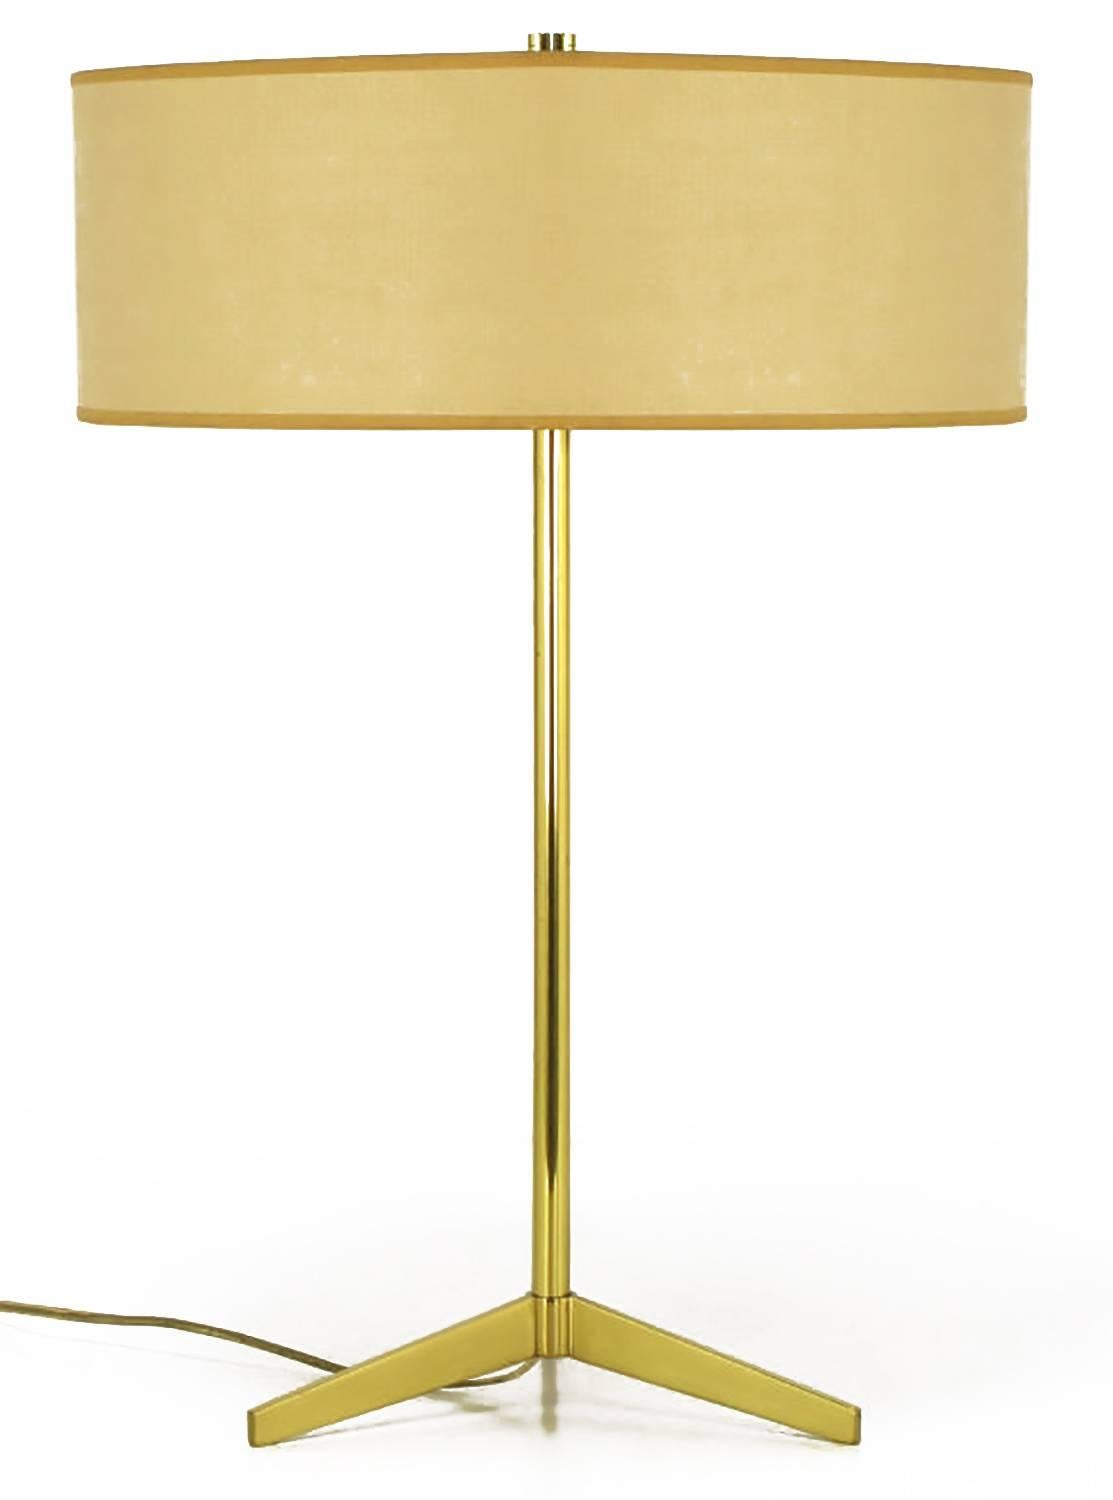 Simple and elegant brass tripod based table lamp by Lightolier. White porcelain dual sockets with white metal disc housing. Sold with drum shade and pierced top diffuser. From the period when Lightolier imported lamps by Arteluce, although we have